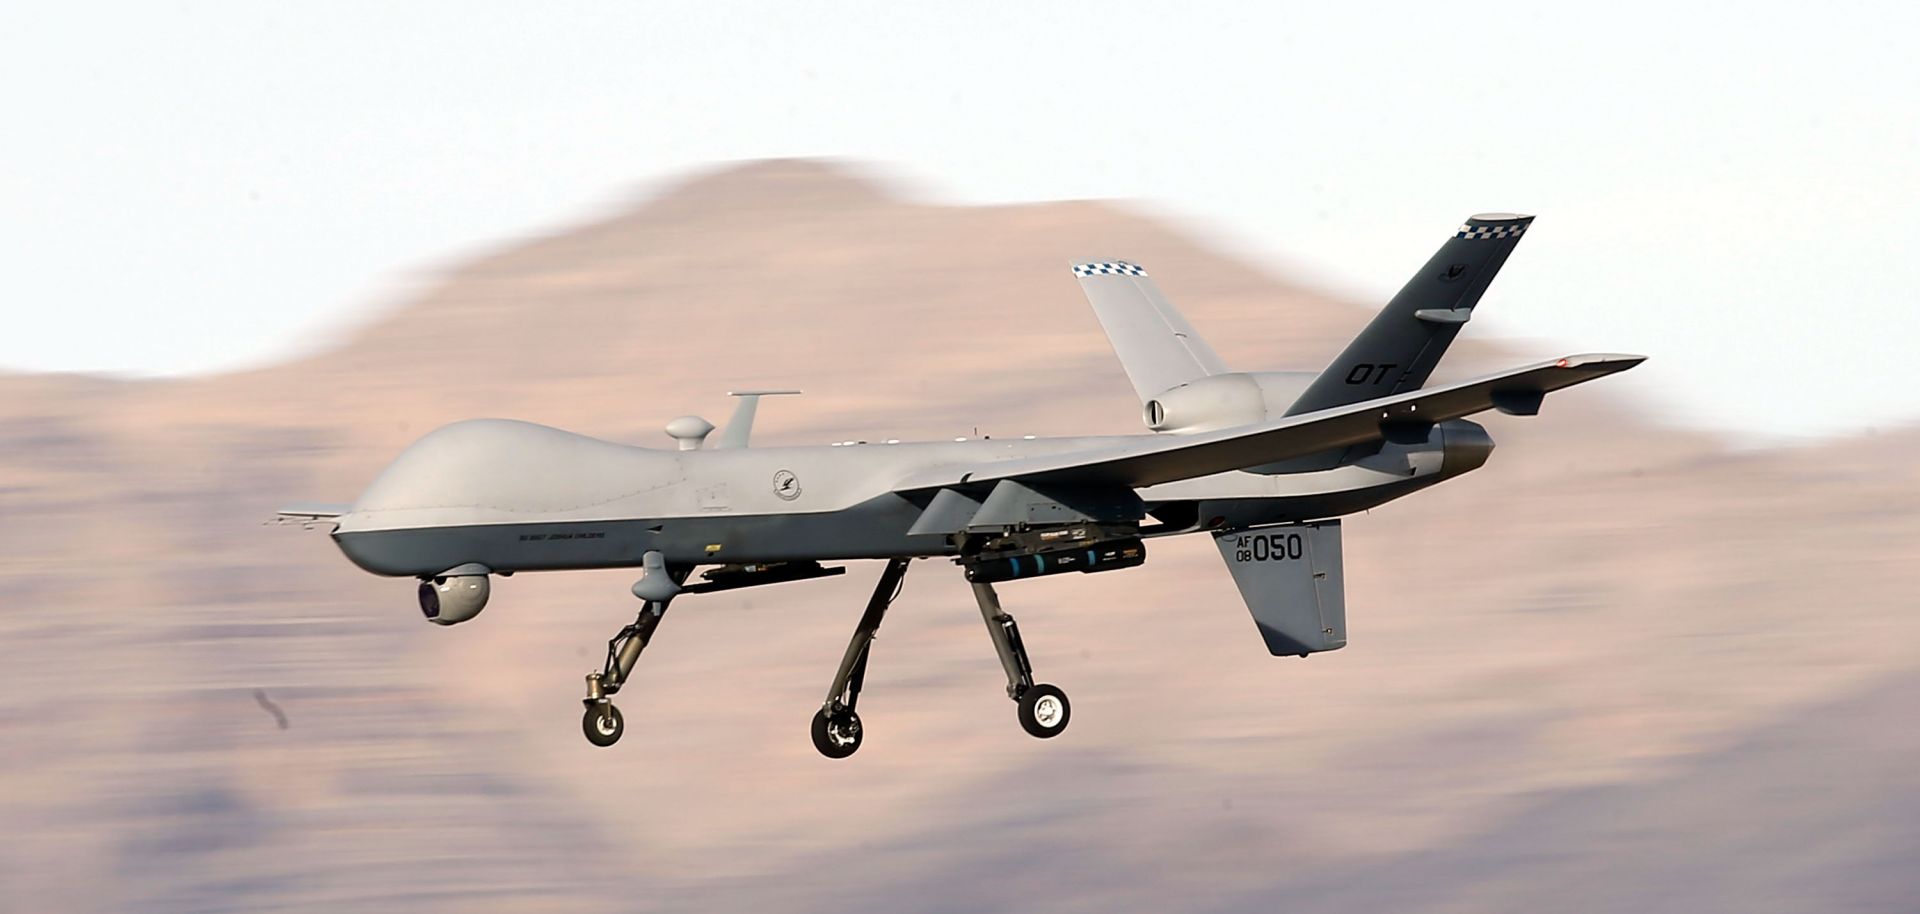 An MQ-9 Reaper remotely piloted aircraft (RPA) flies by during a training mission.